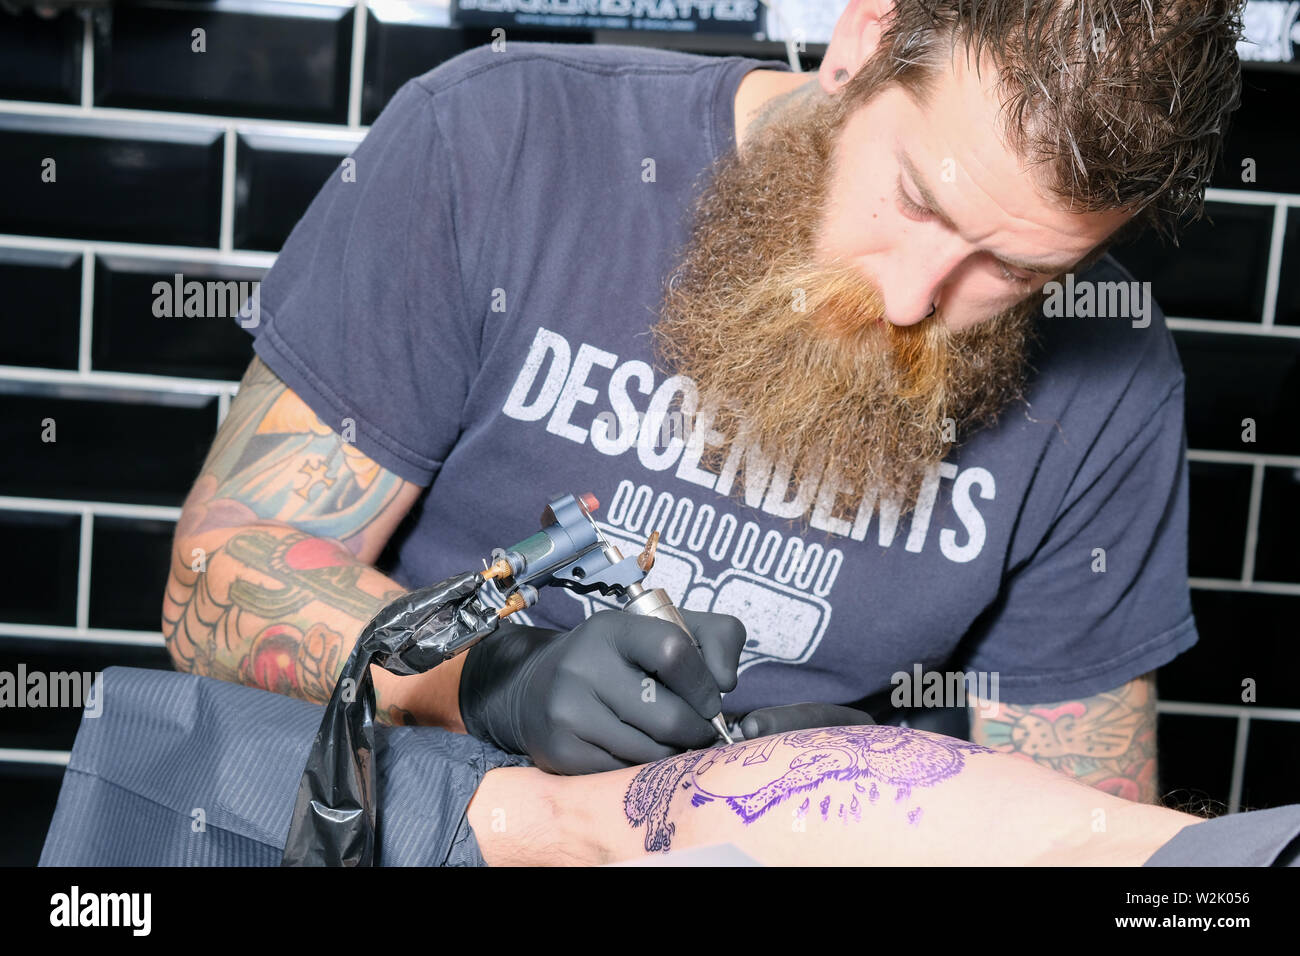 Page 2 - Tattooist Uk High Resolution Stock Photography and Images - Alamy